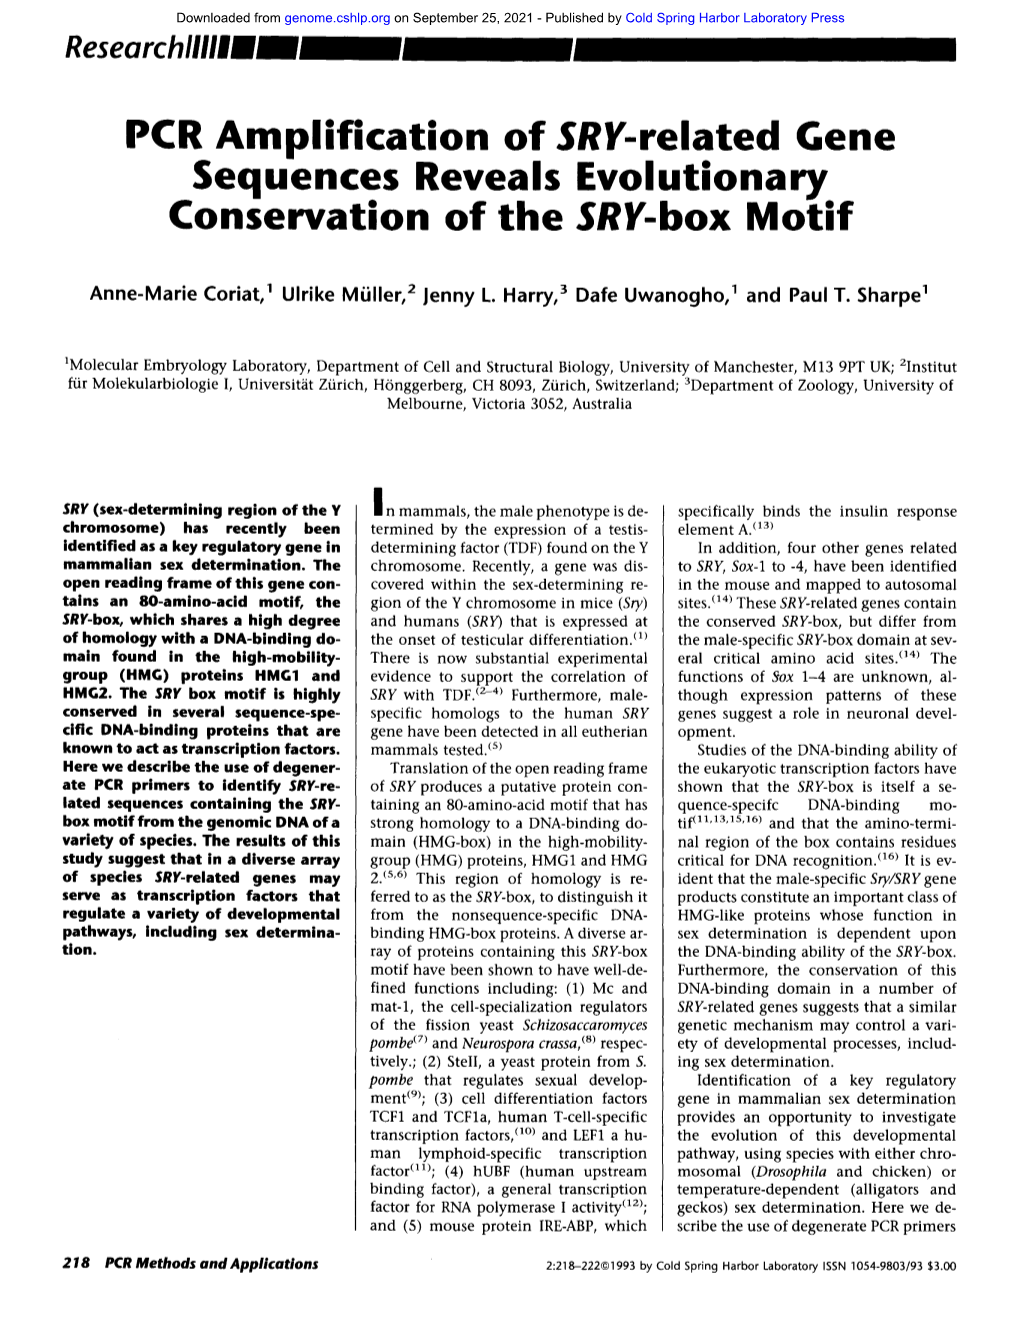 Sequences Reveals Evolutionary Conservation of the SRY-Box Motif